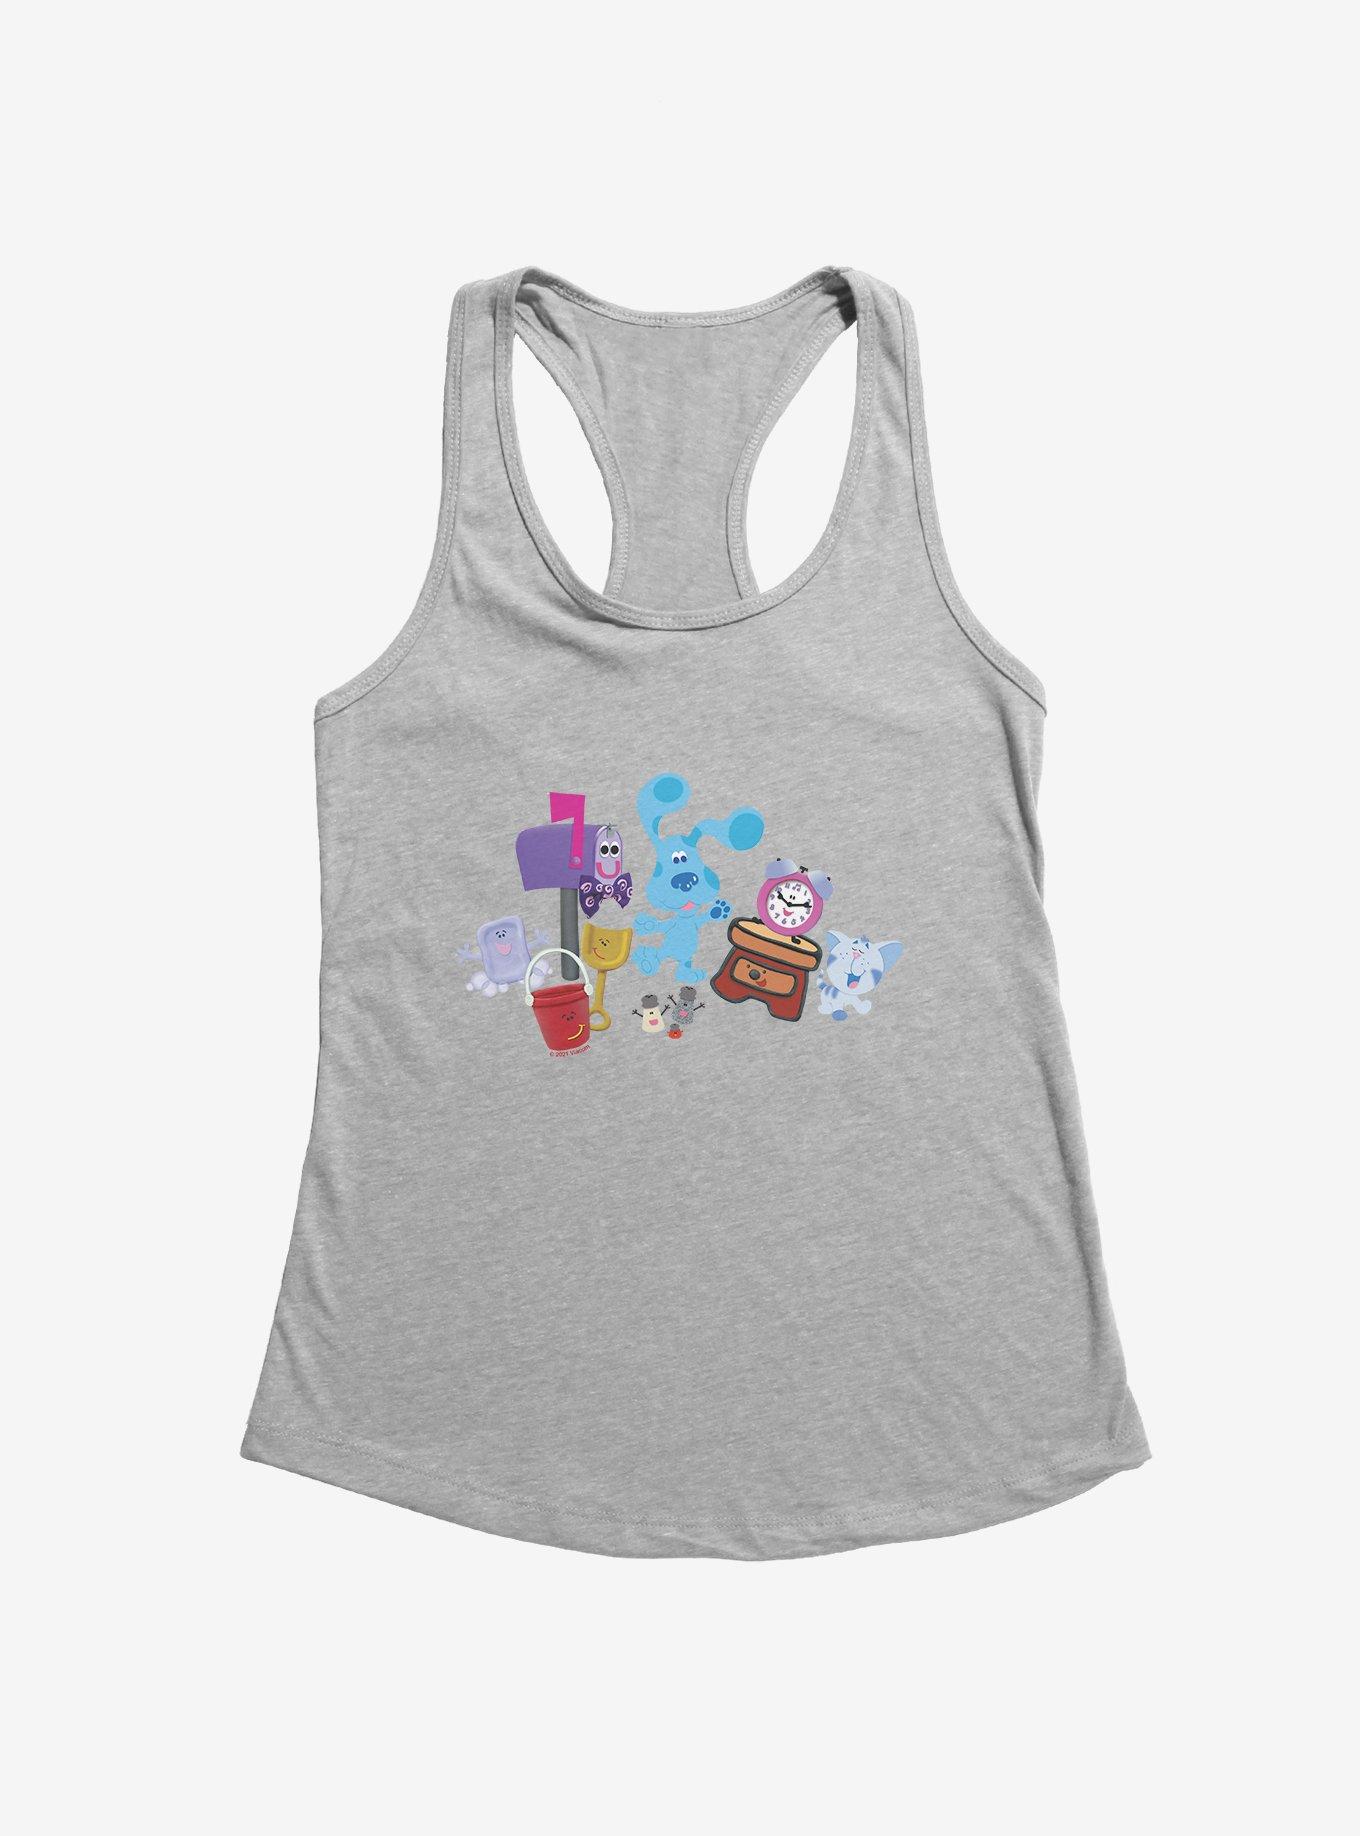 Blue's Clues Group Cheer Girls Tank, HEATHER, hi-res